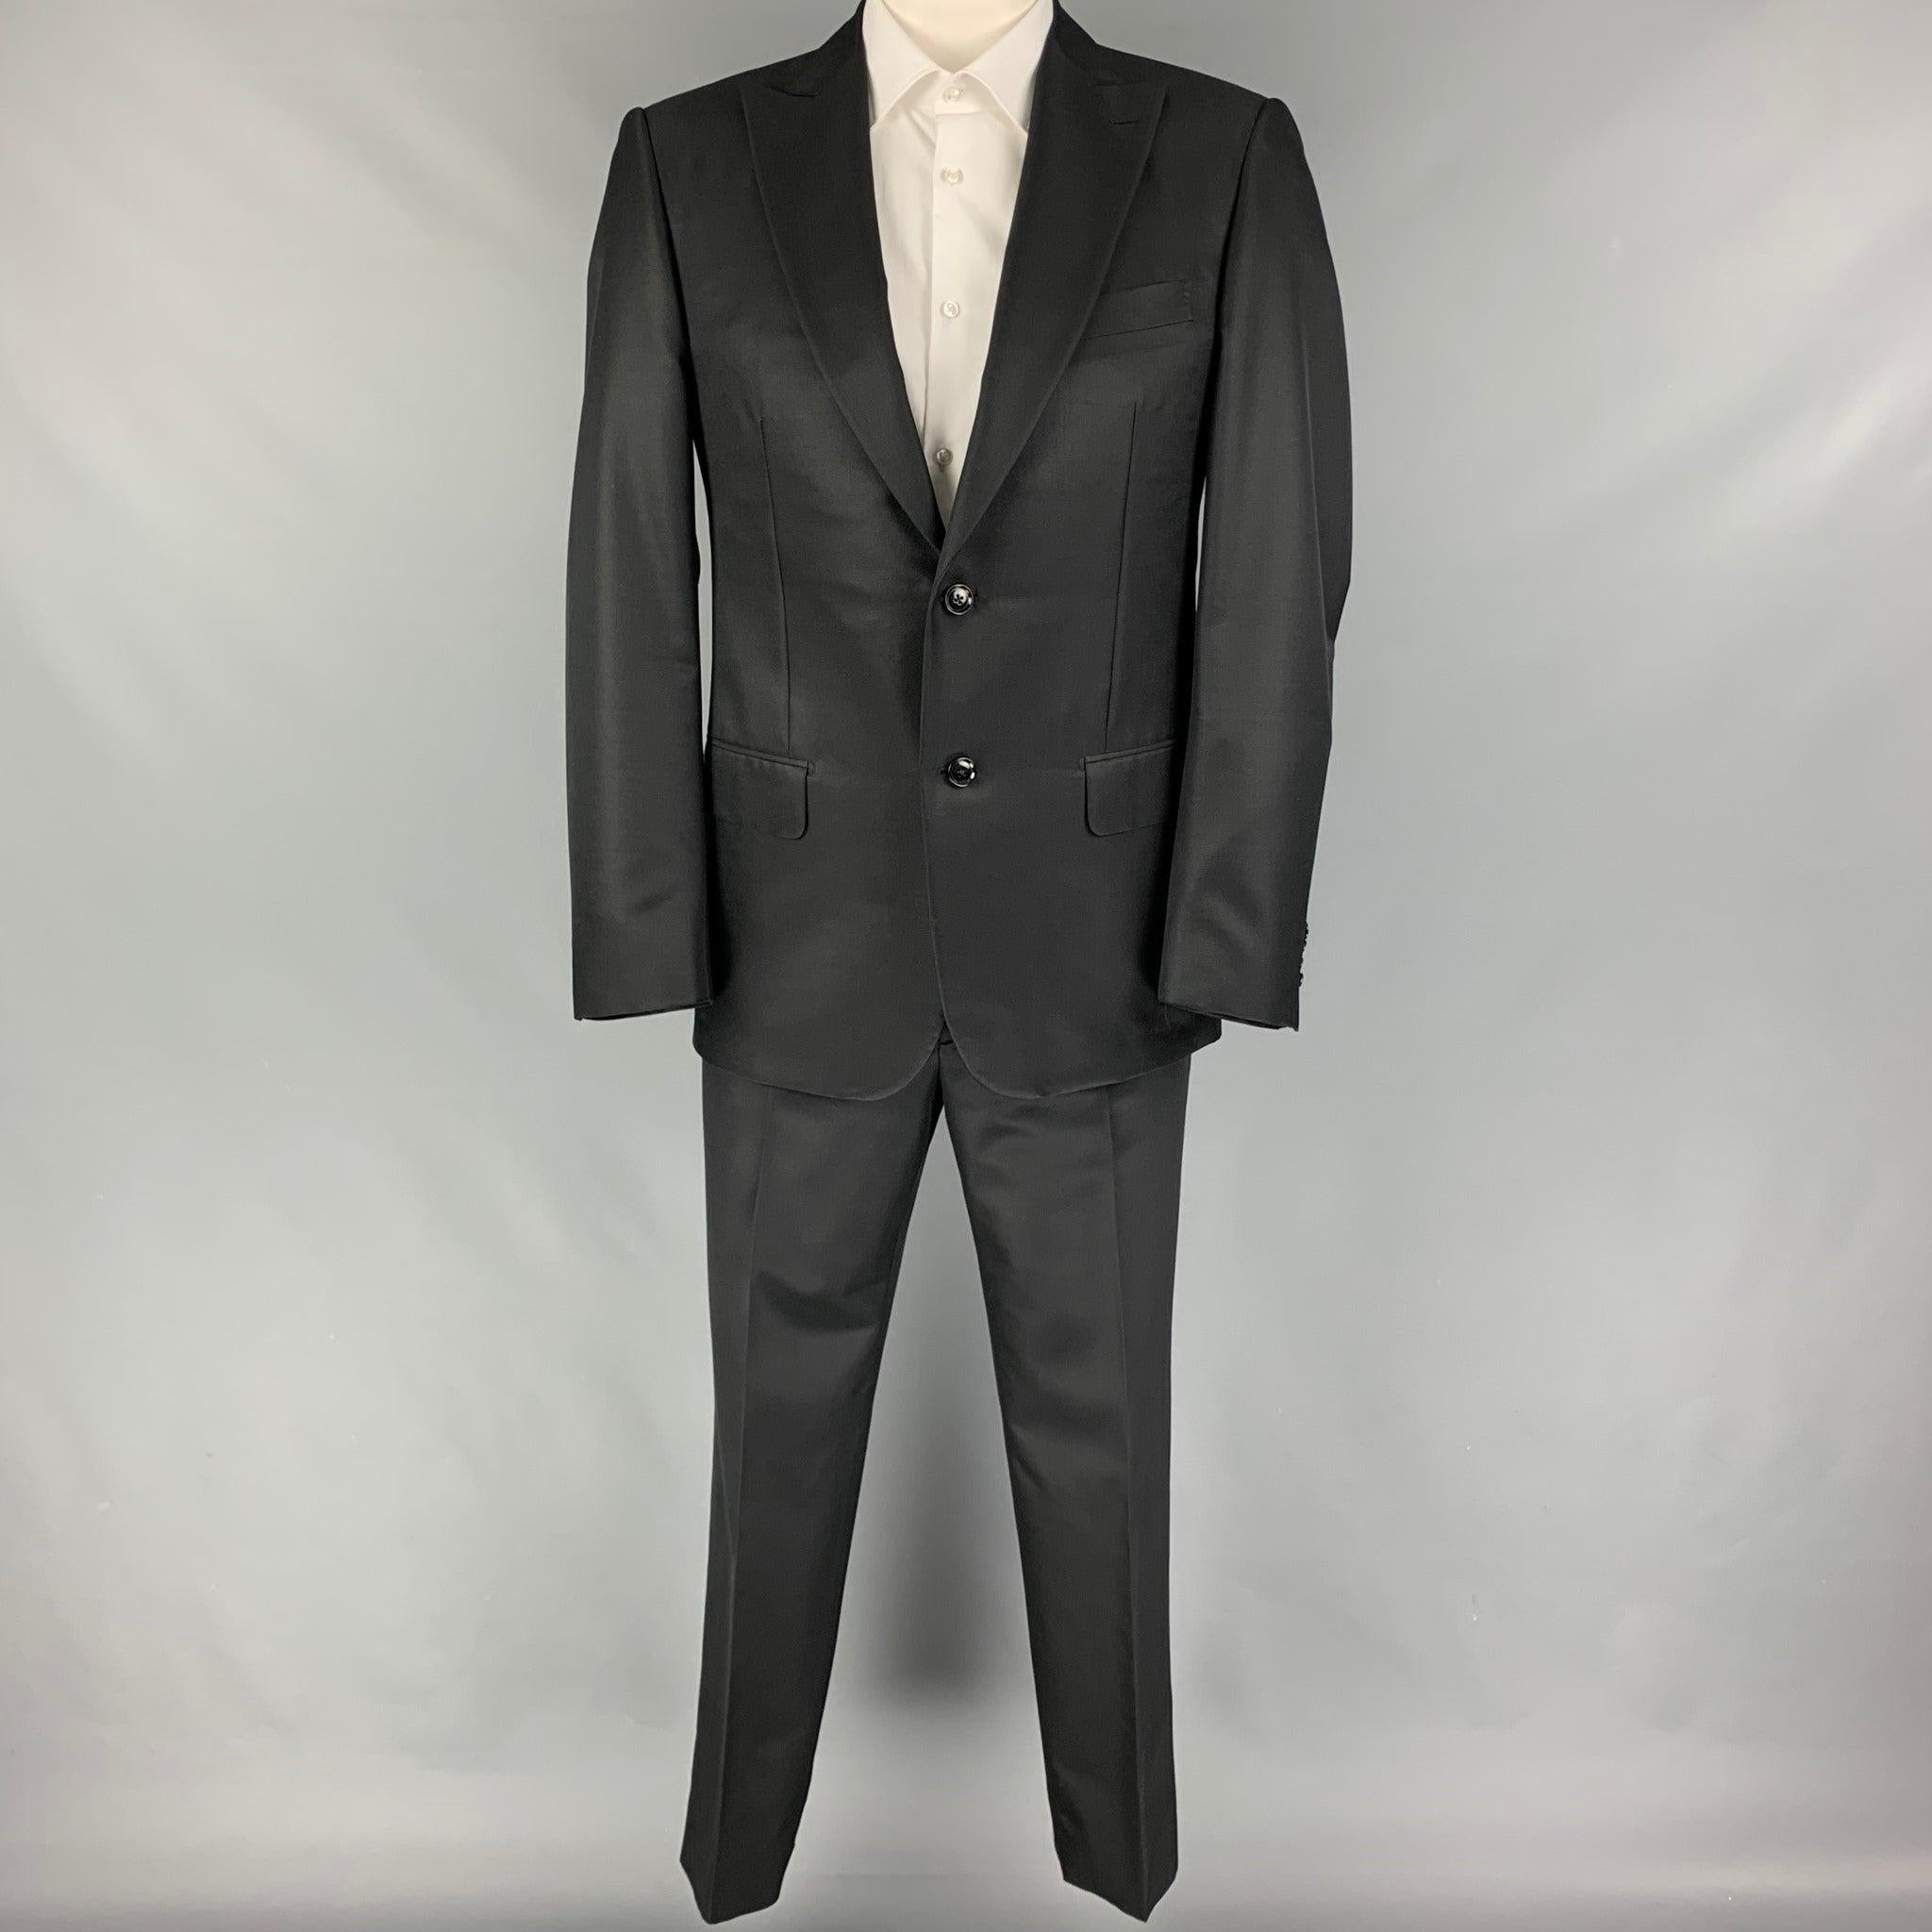 PAL ZILERI suit comes in a black wool / silk with a full liner and includes a single breasted, single button sport coat with peak lapel and matching flat front trousers. Made in Italy. Very Good Pre-Owned Condition. 

Marked:   50 

Measurements: 
 